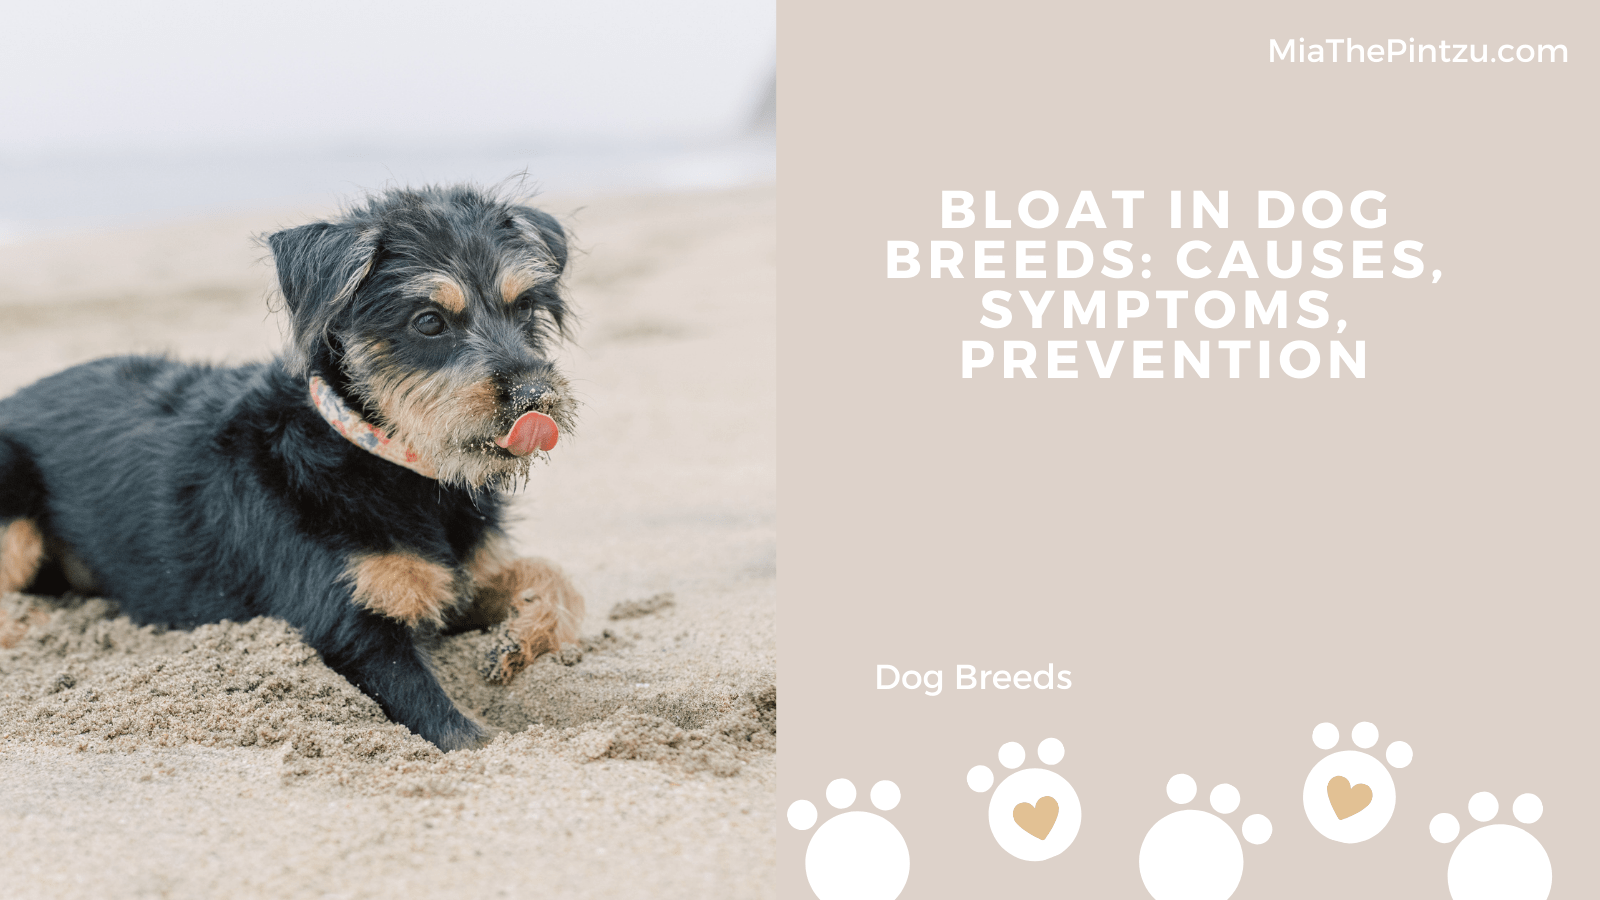 Bloat in Dog Breeds: Causes